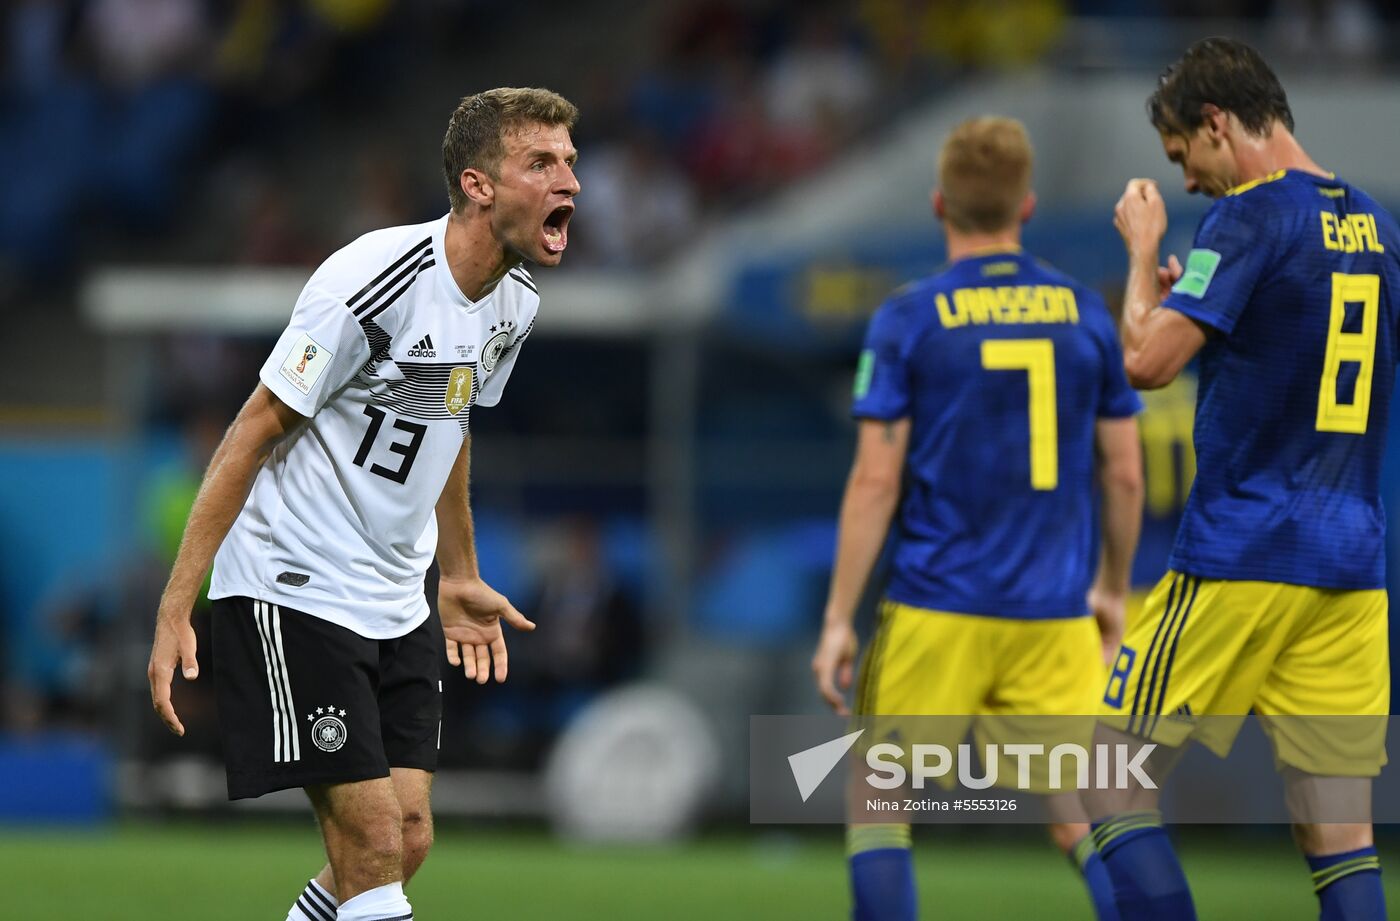 Russia World Cup Germany - Sweden